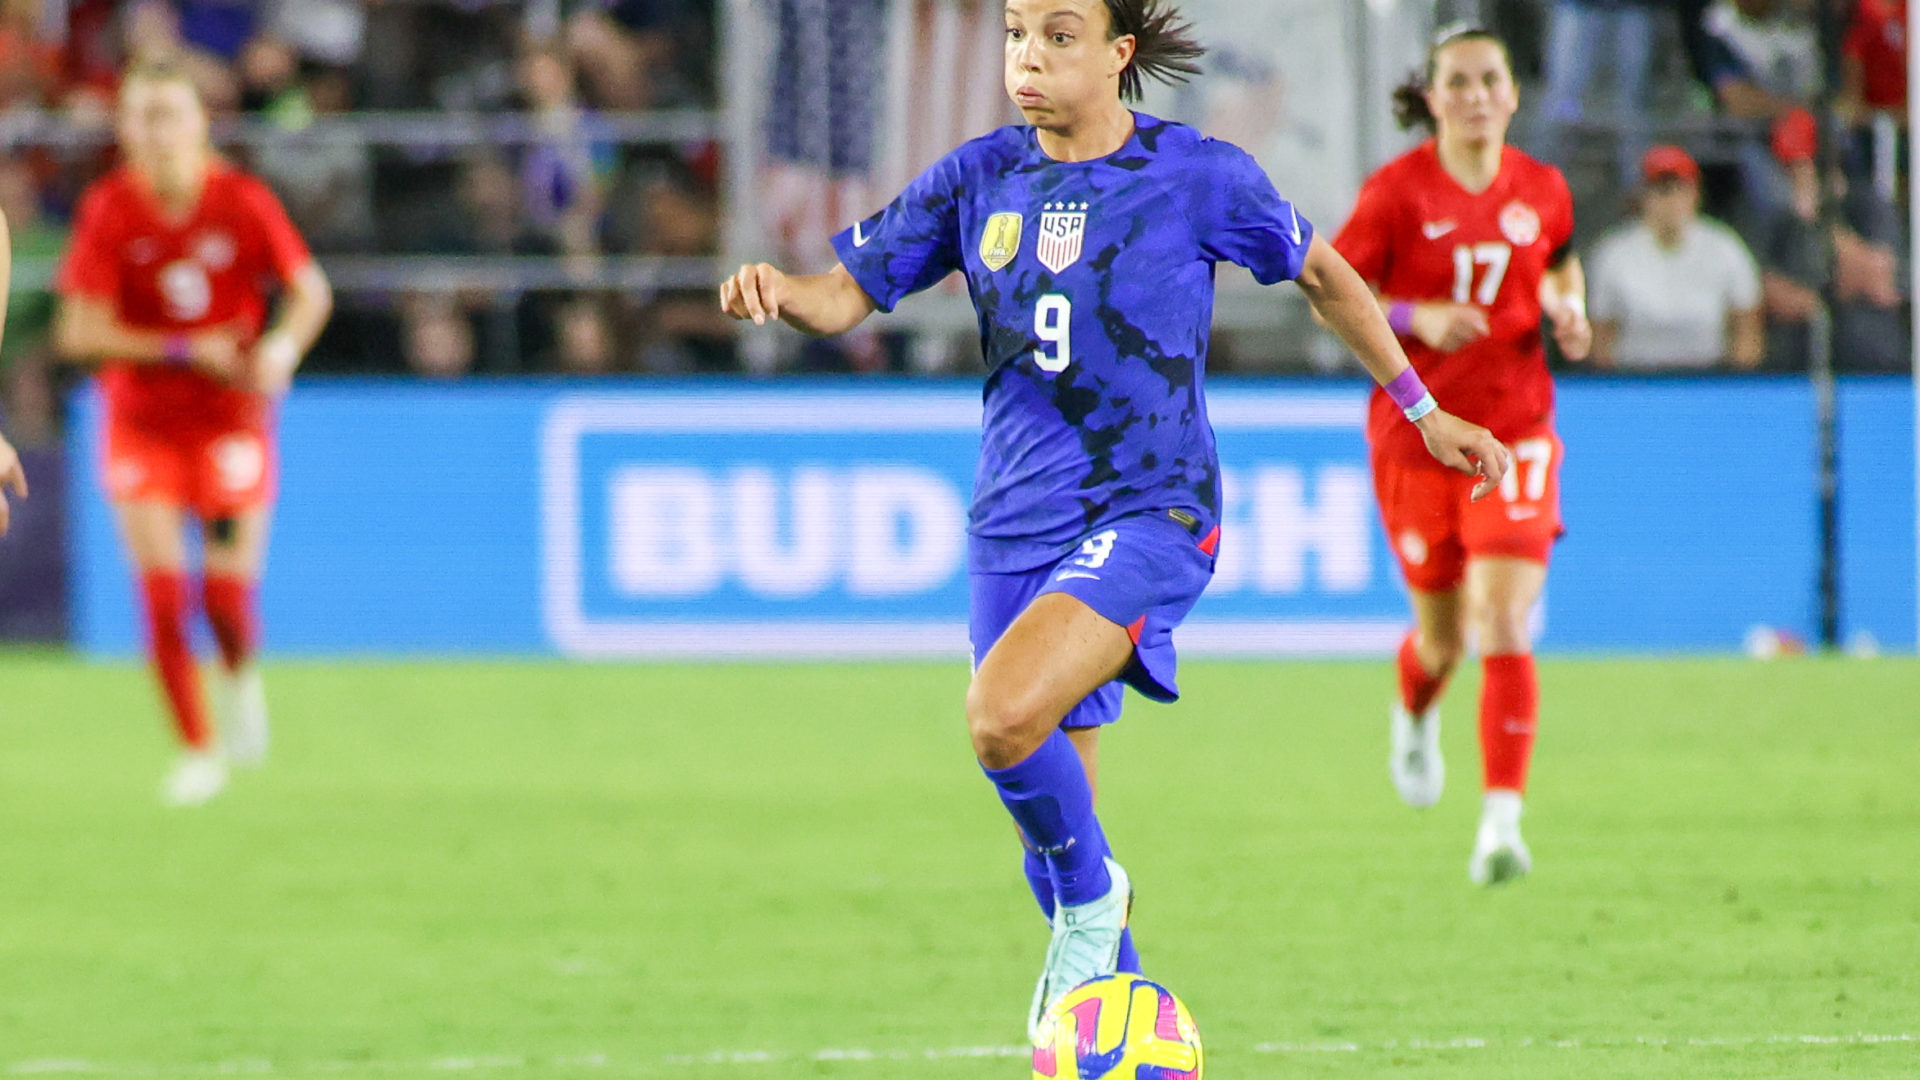 Photos: USWNT tops Canada at SheBelieves Cup